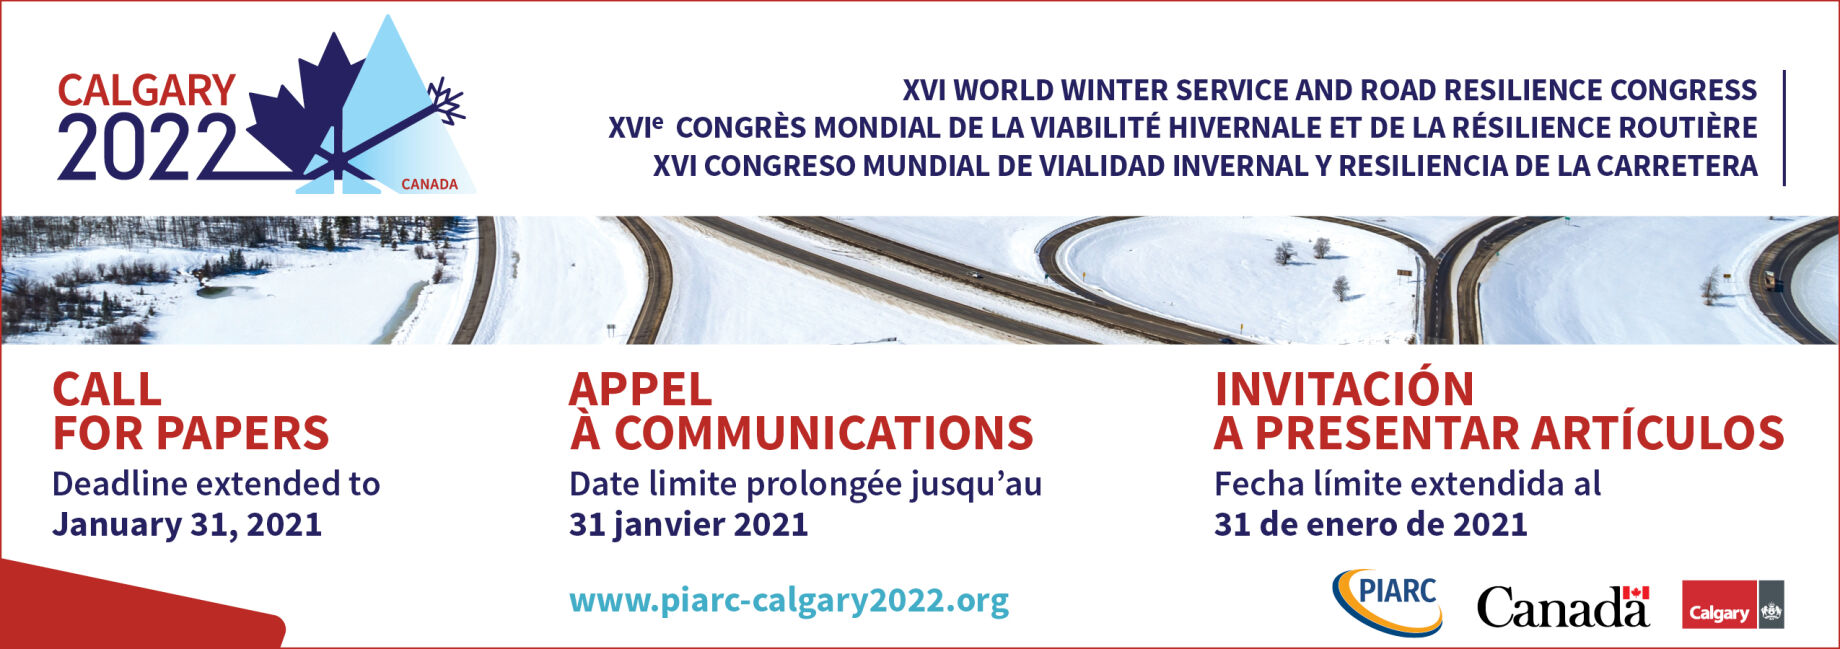 Are you an expert in winter service or road resilience? Deadline extended! Submit your abstract before January 31, 2021!